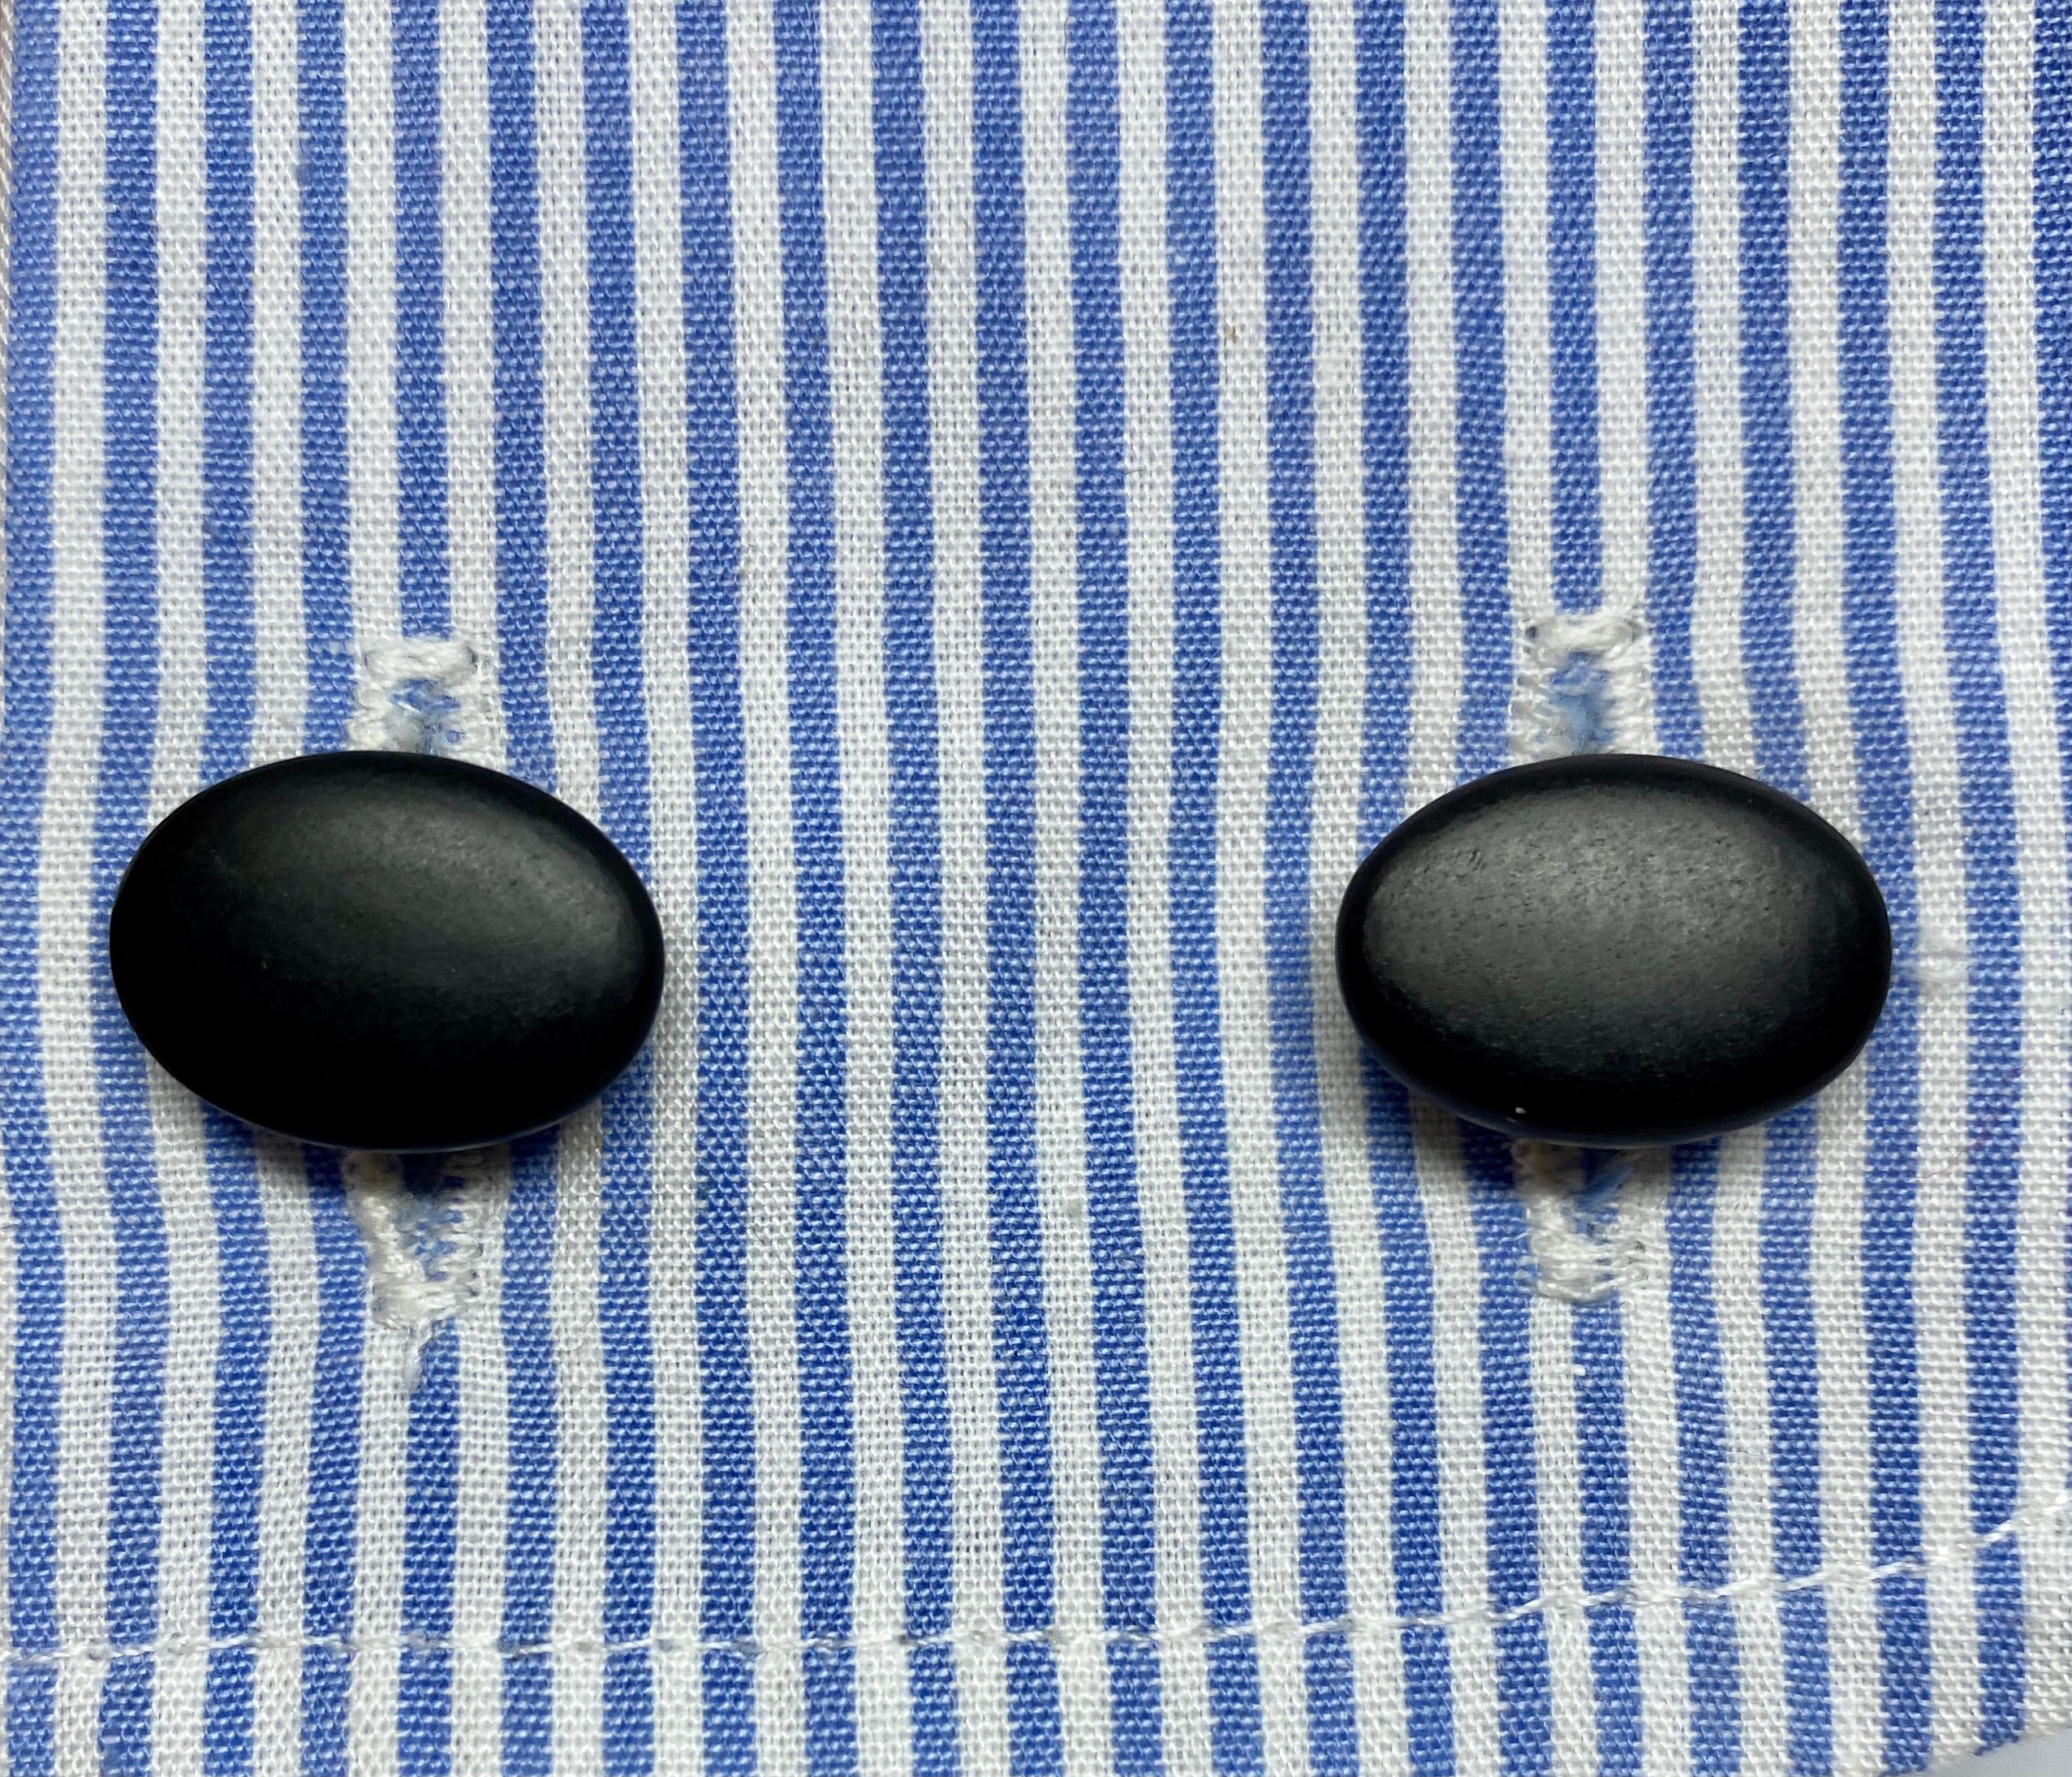 Antique Austrian Oval Cufflinks in 14k Gold with Ebony In Good Condition For Sale In San Rafael, CA